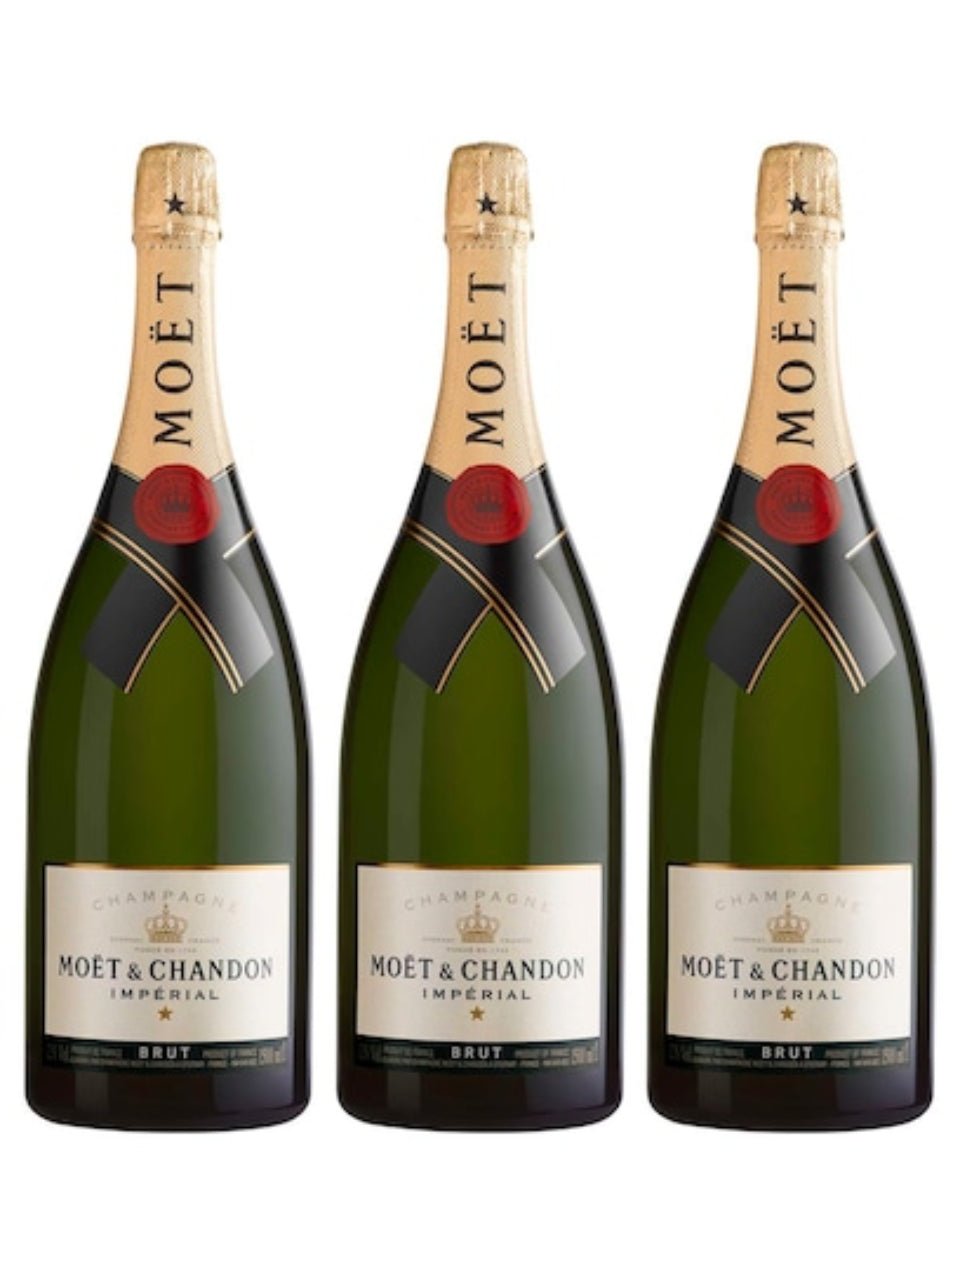 Moët & Chandon Brut Imperial Magnum Trio Case | Exquisite Wine & Alcohol Gift Delivery Toronto Canada | Vyno